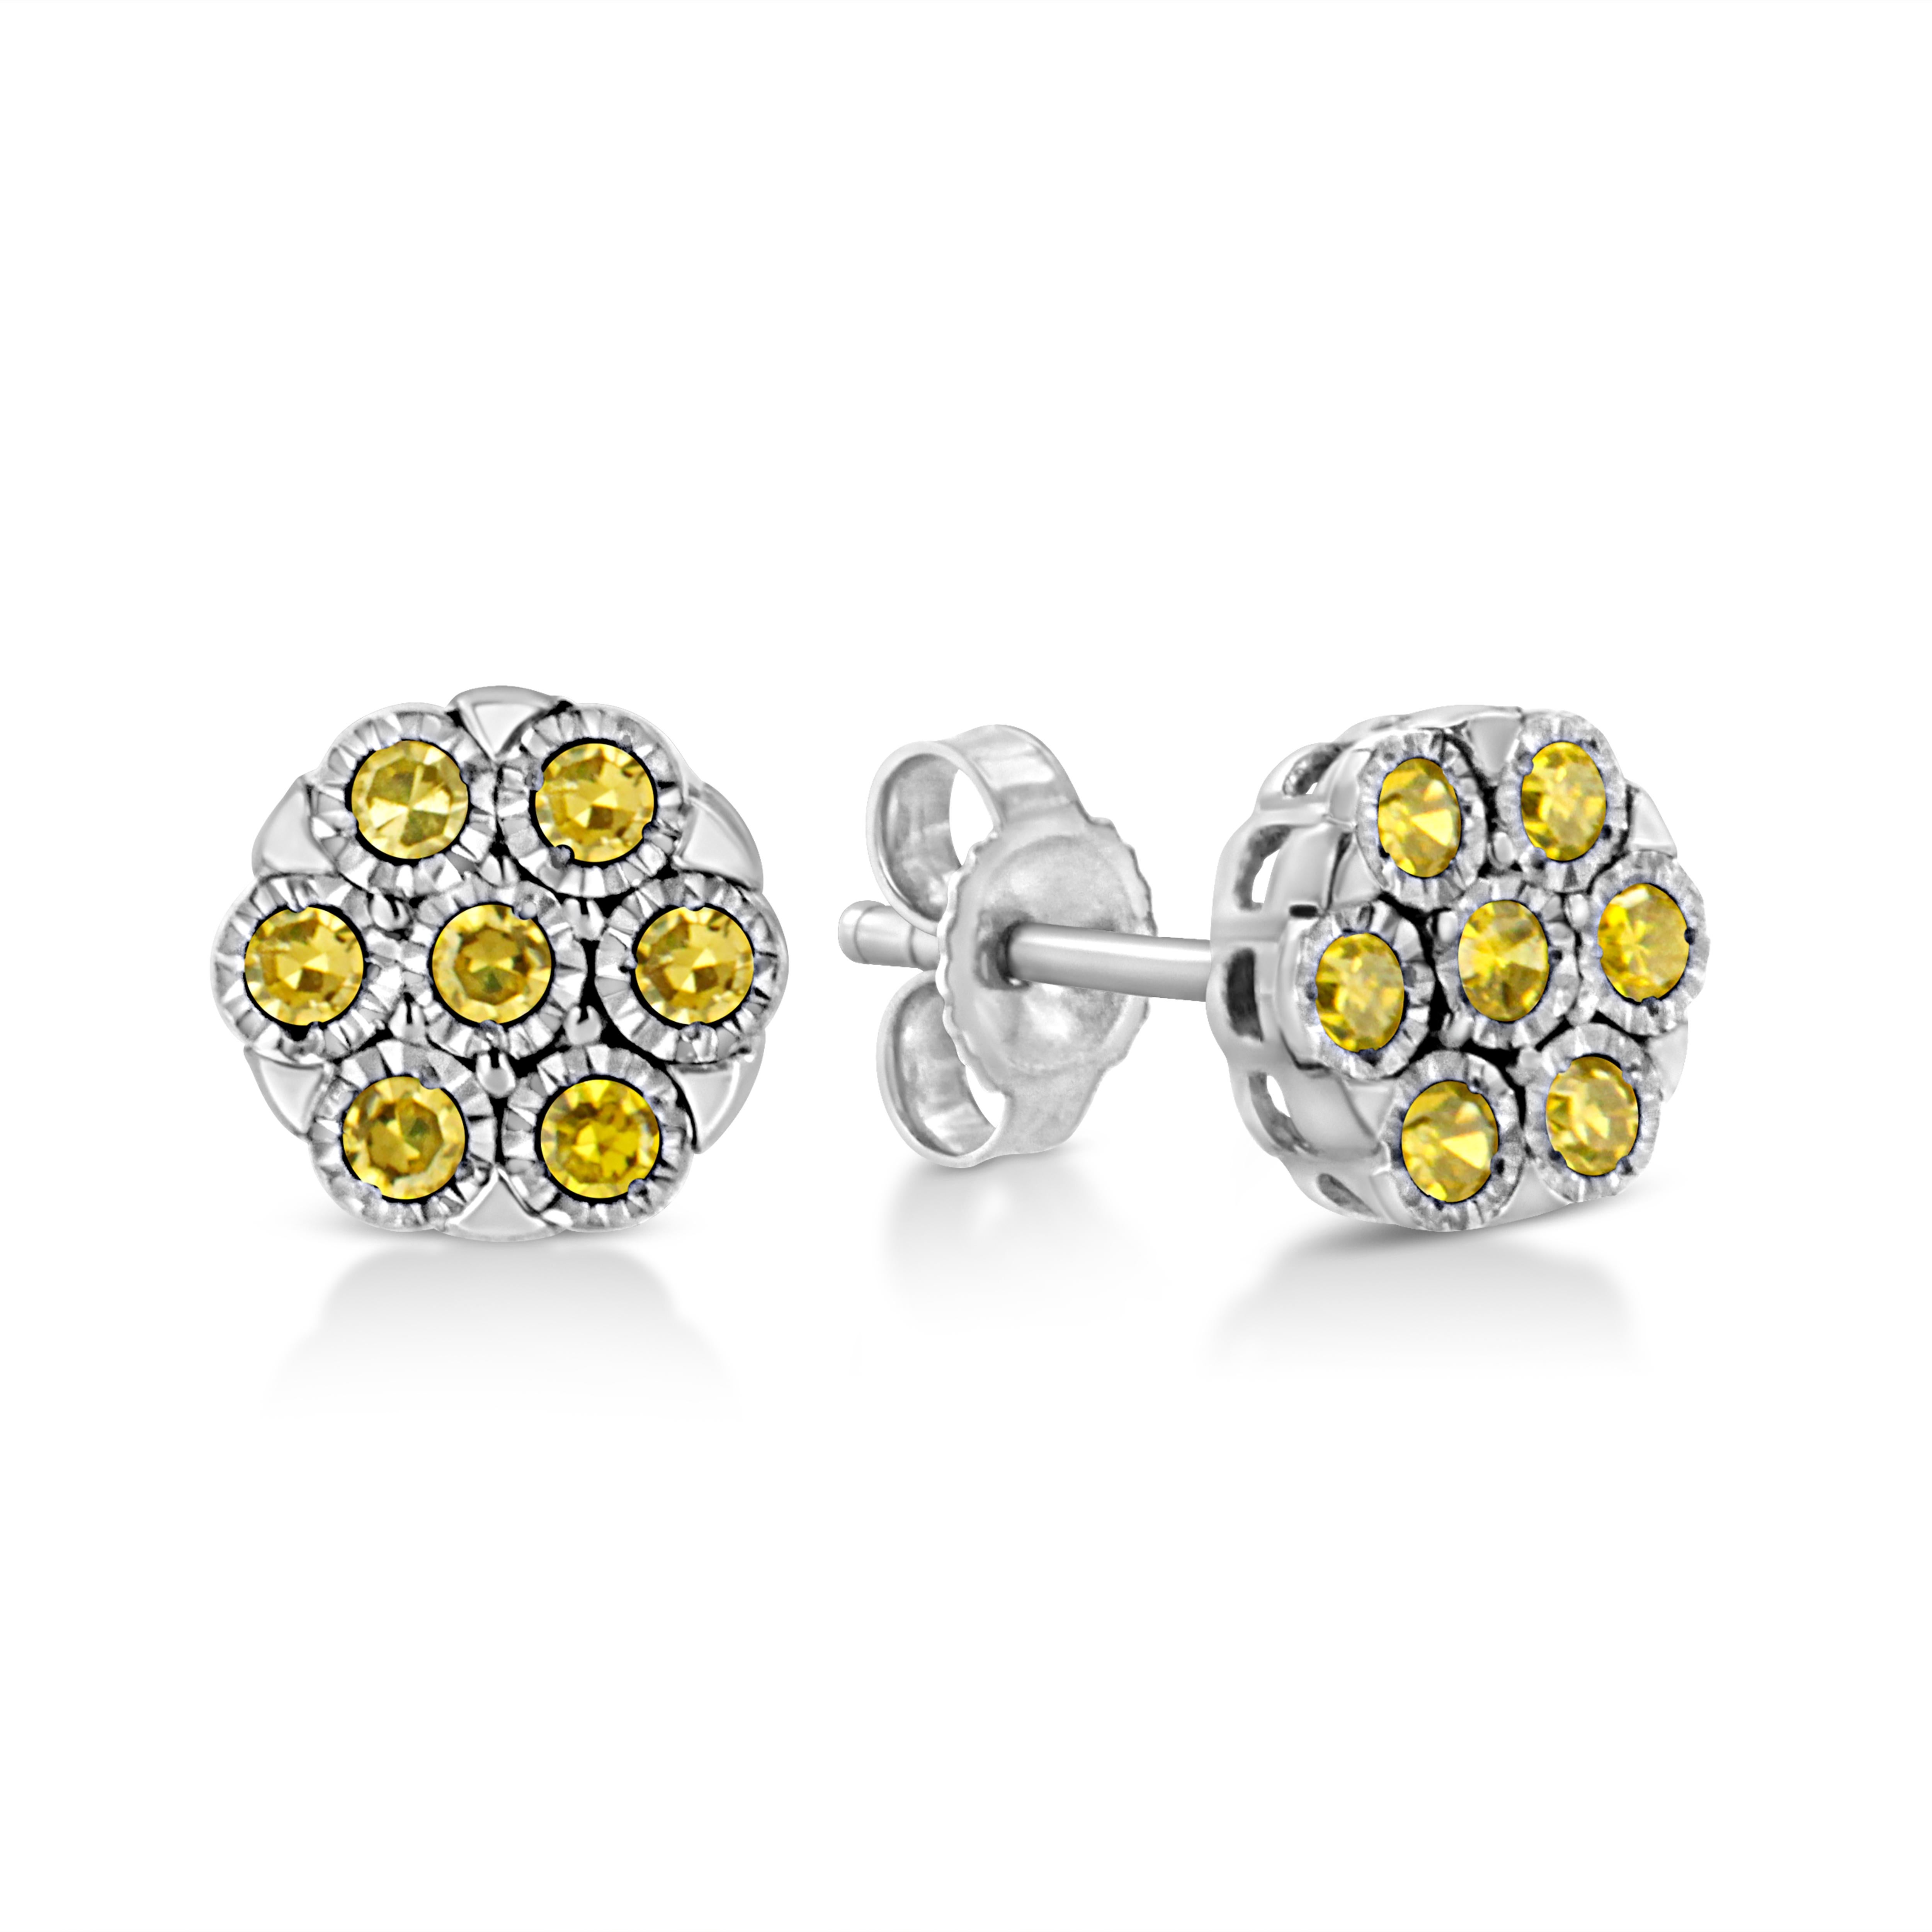 Contemporary .925 Sterling Silver 1/4 Carat Yellow Color Treated Diamond Flower Earrings For Sale